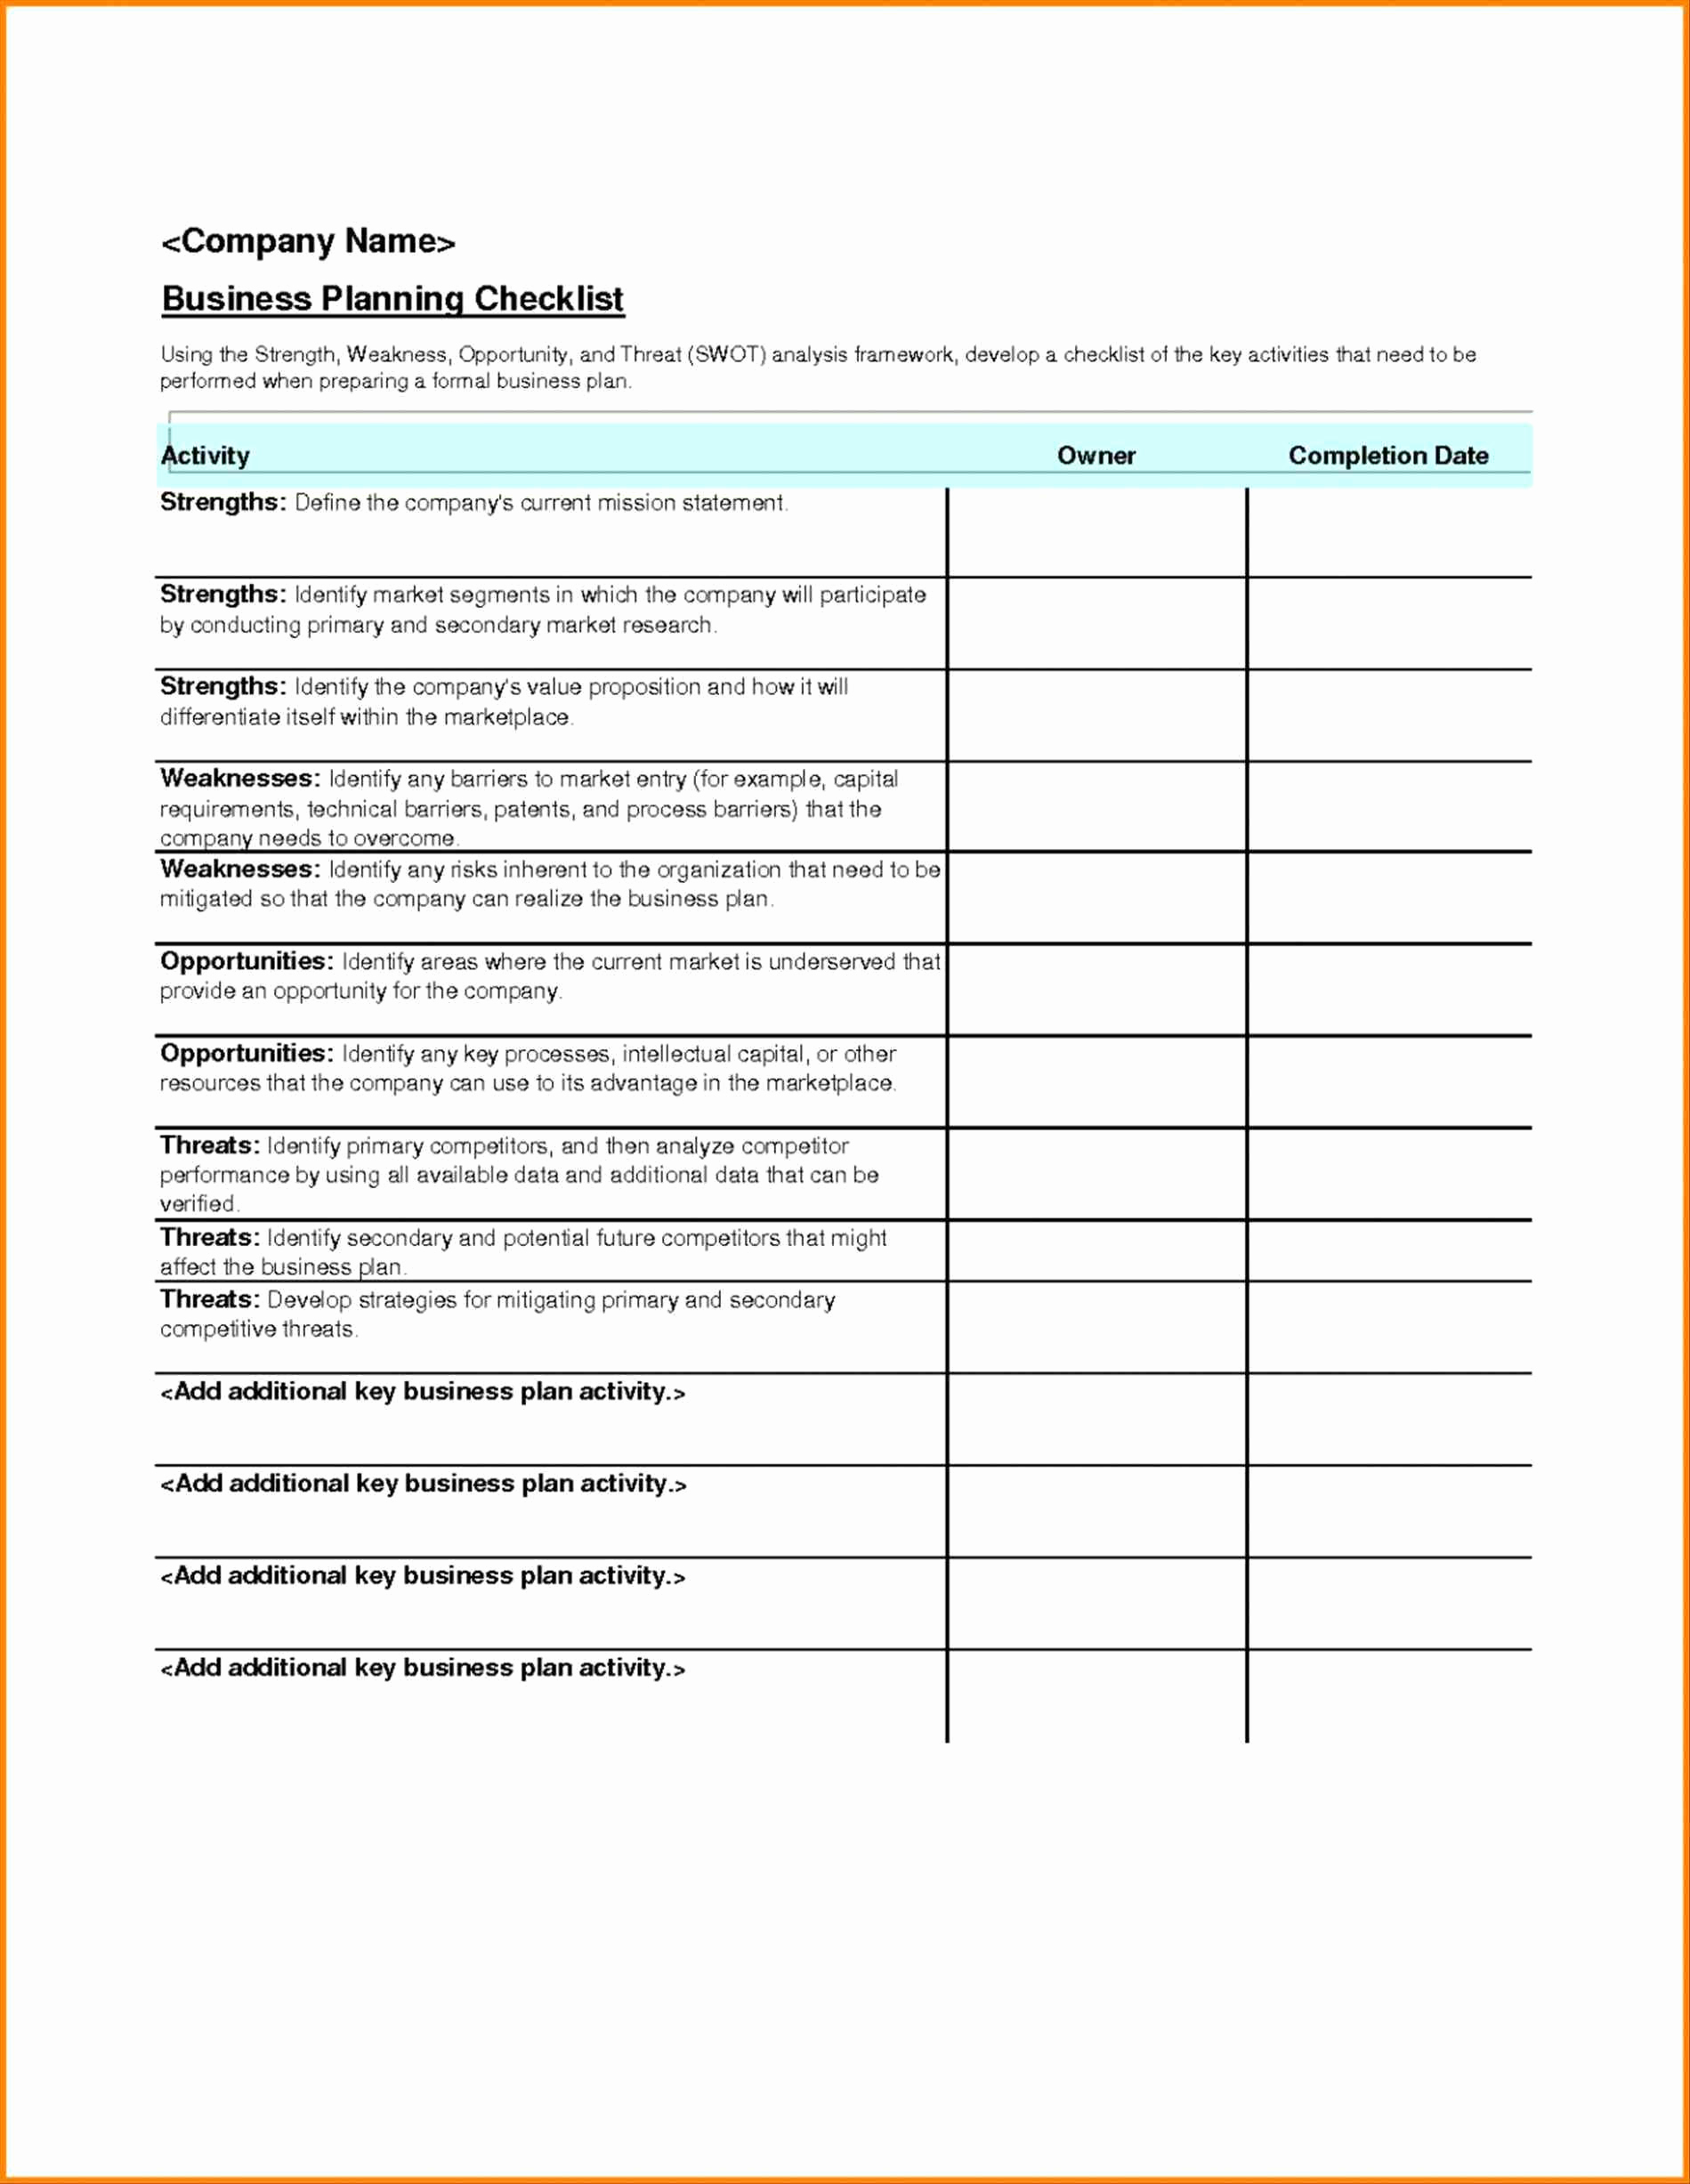 Simple Accounting Spreadsheet Best Of Simple Accounting Spreadsheet and Basic Accounting Spreadsheet Template